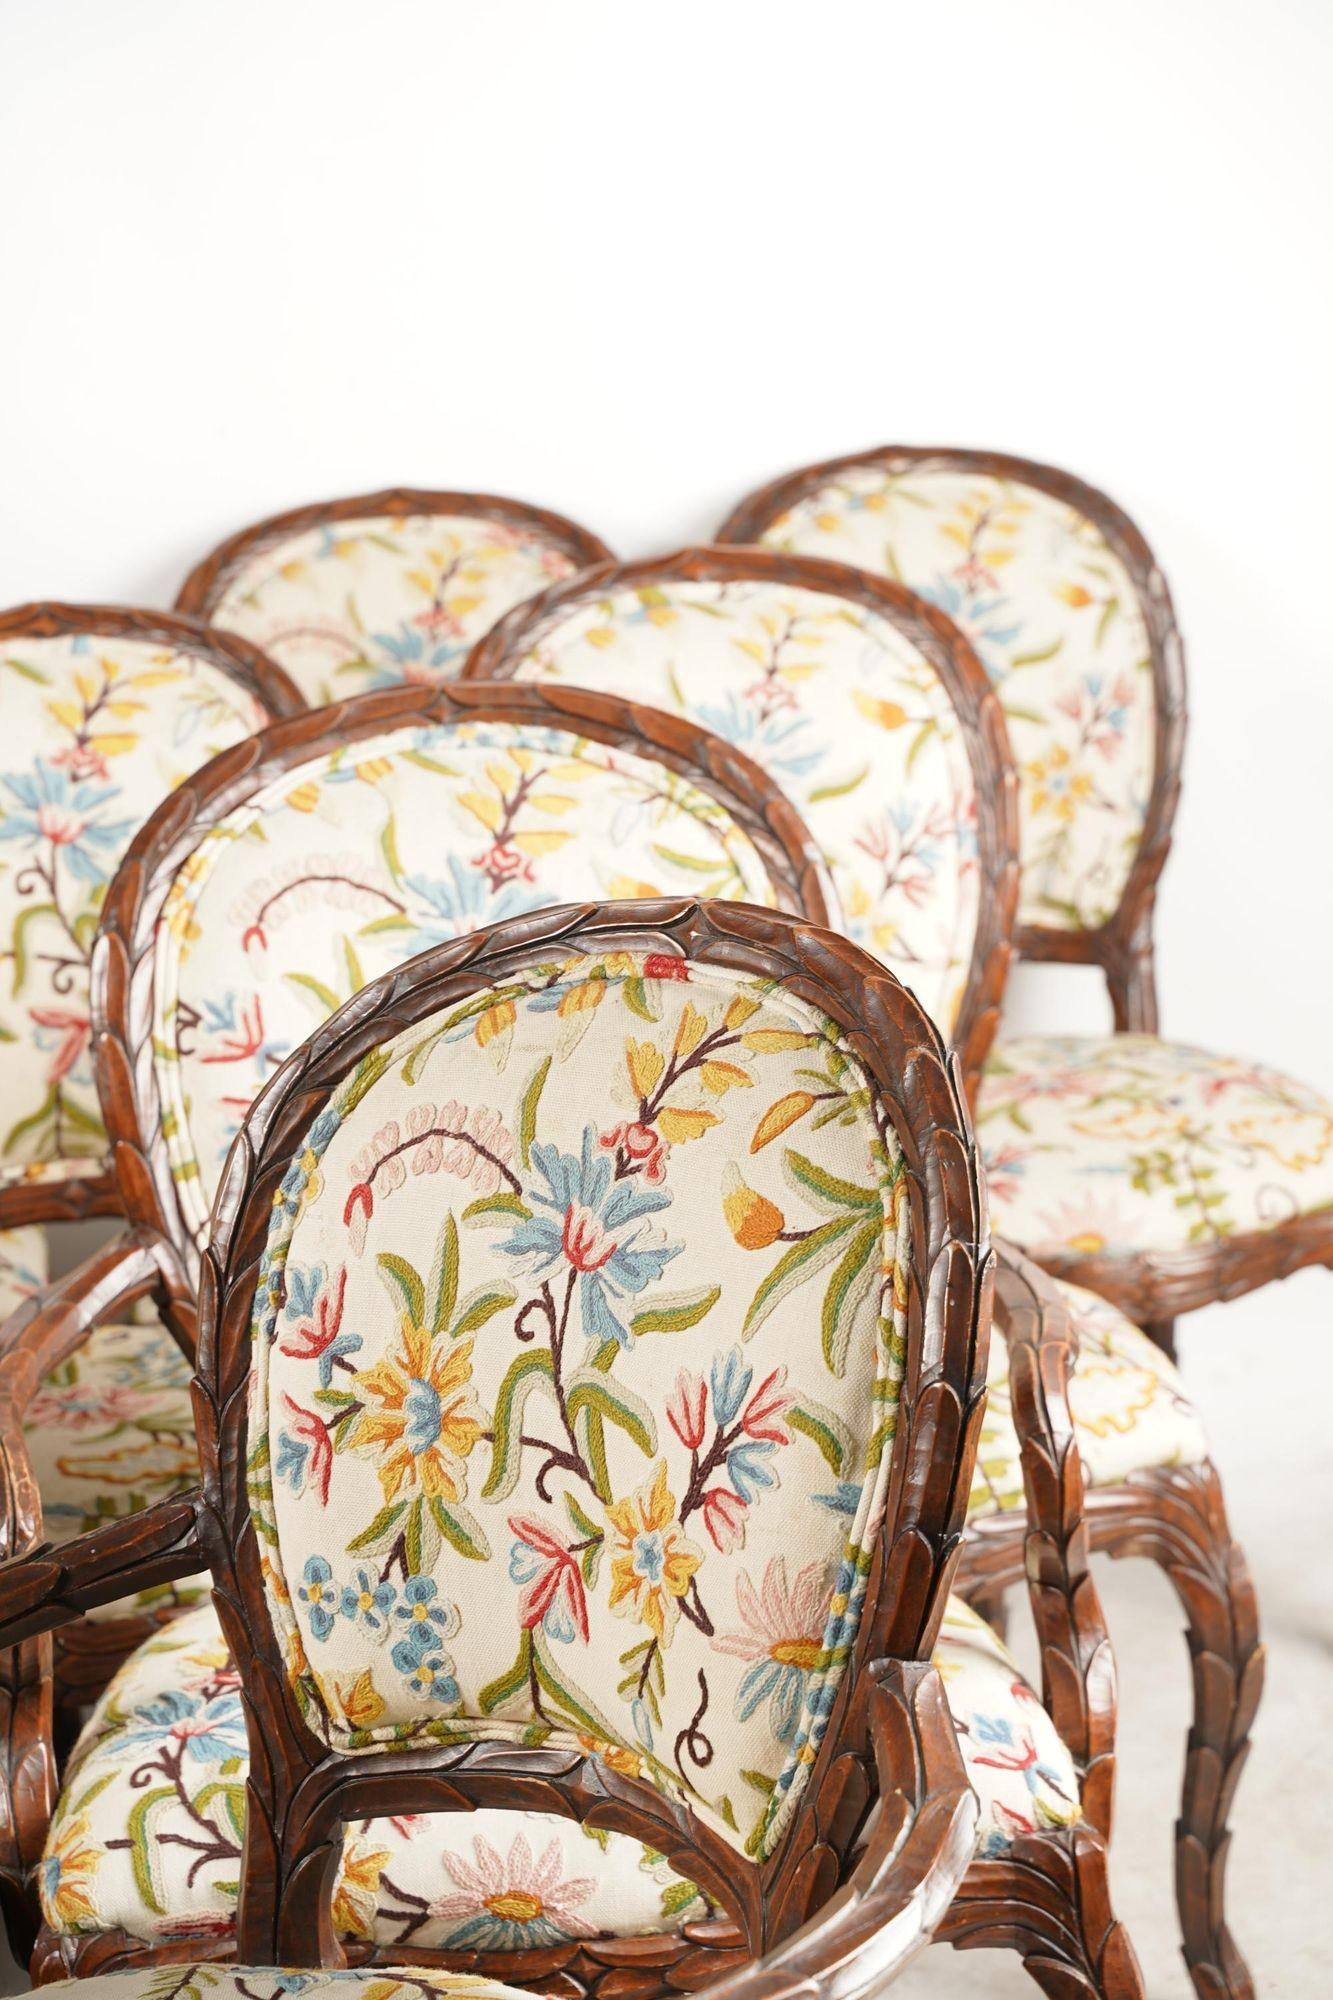 Set of Ten chairs hand carved in a leaf pattern and upholstered in floral crewelwork. This set consists of two armchairs (26 1/4 inches wide; 26 inches deep; 39 1/2 inches high; seat height: 19 inches) and eight side chairs (21 1/4 inches wide; 25